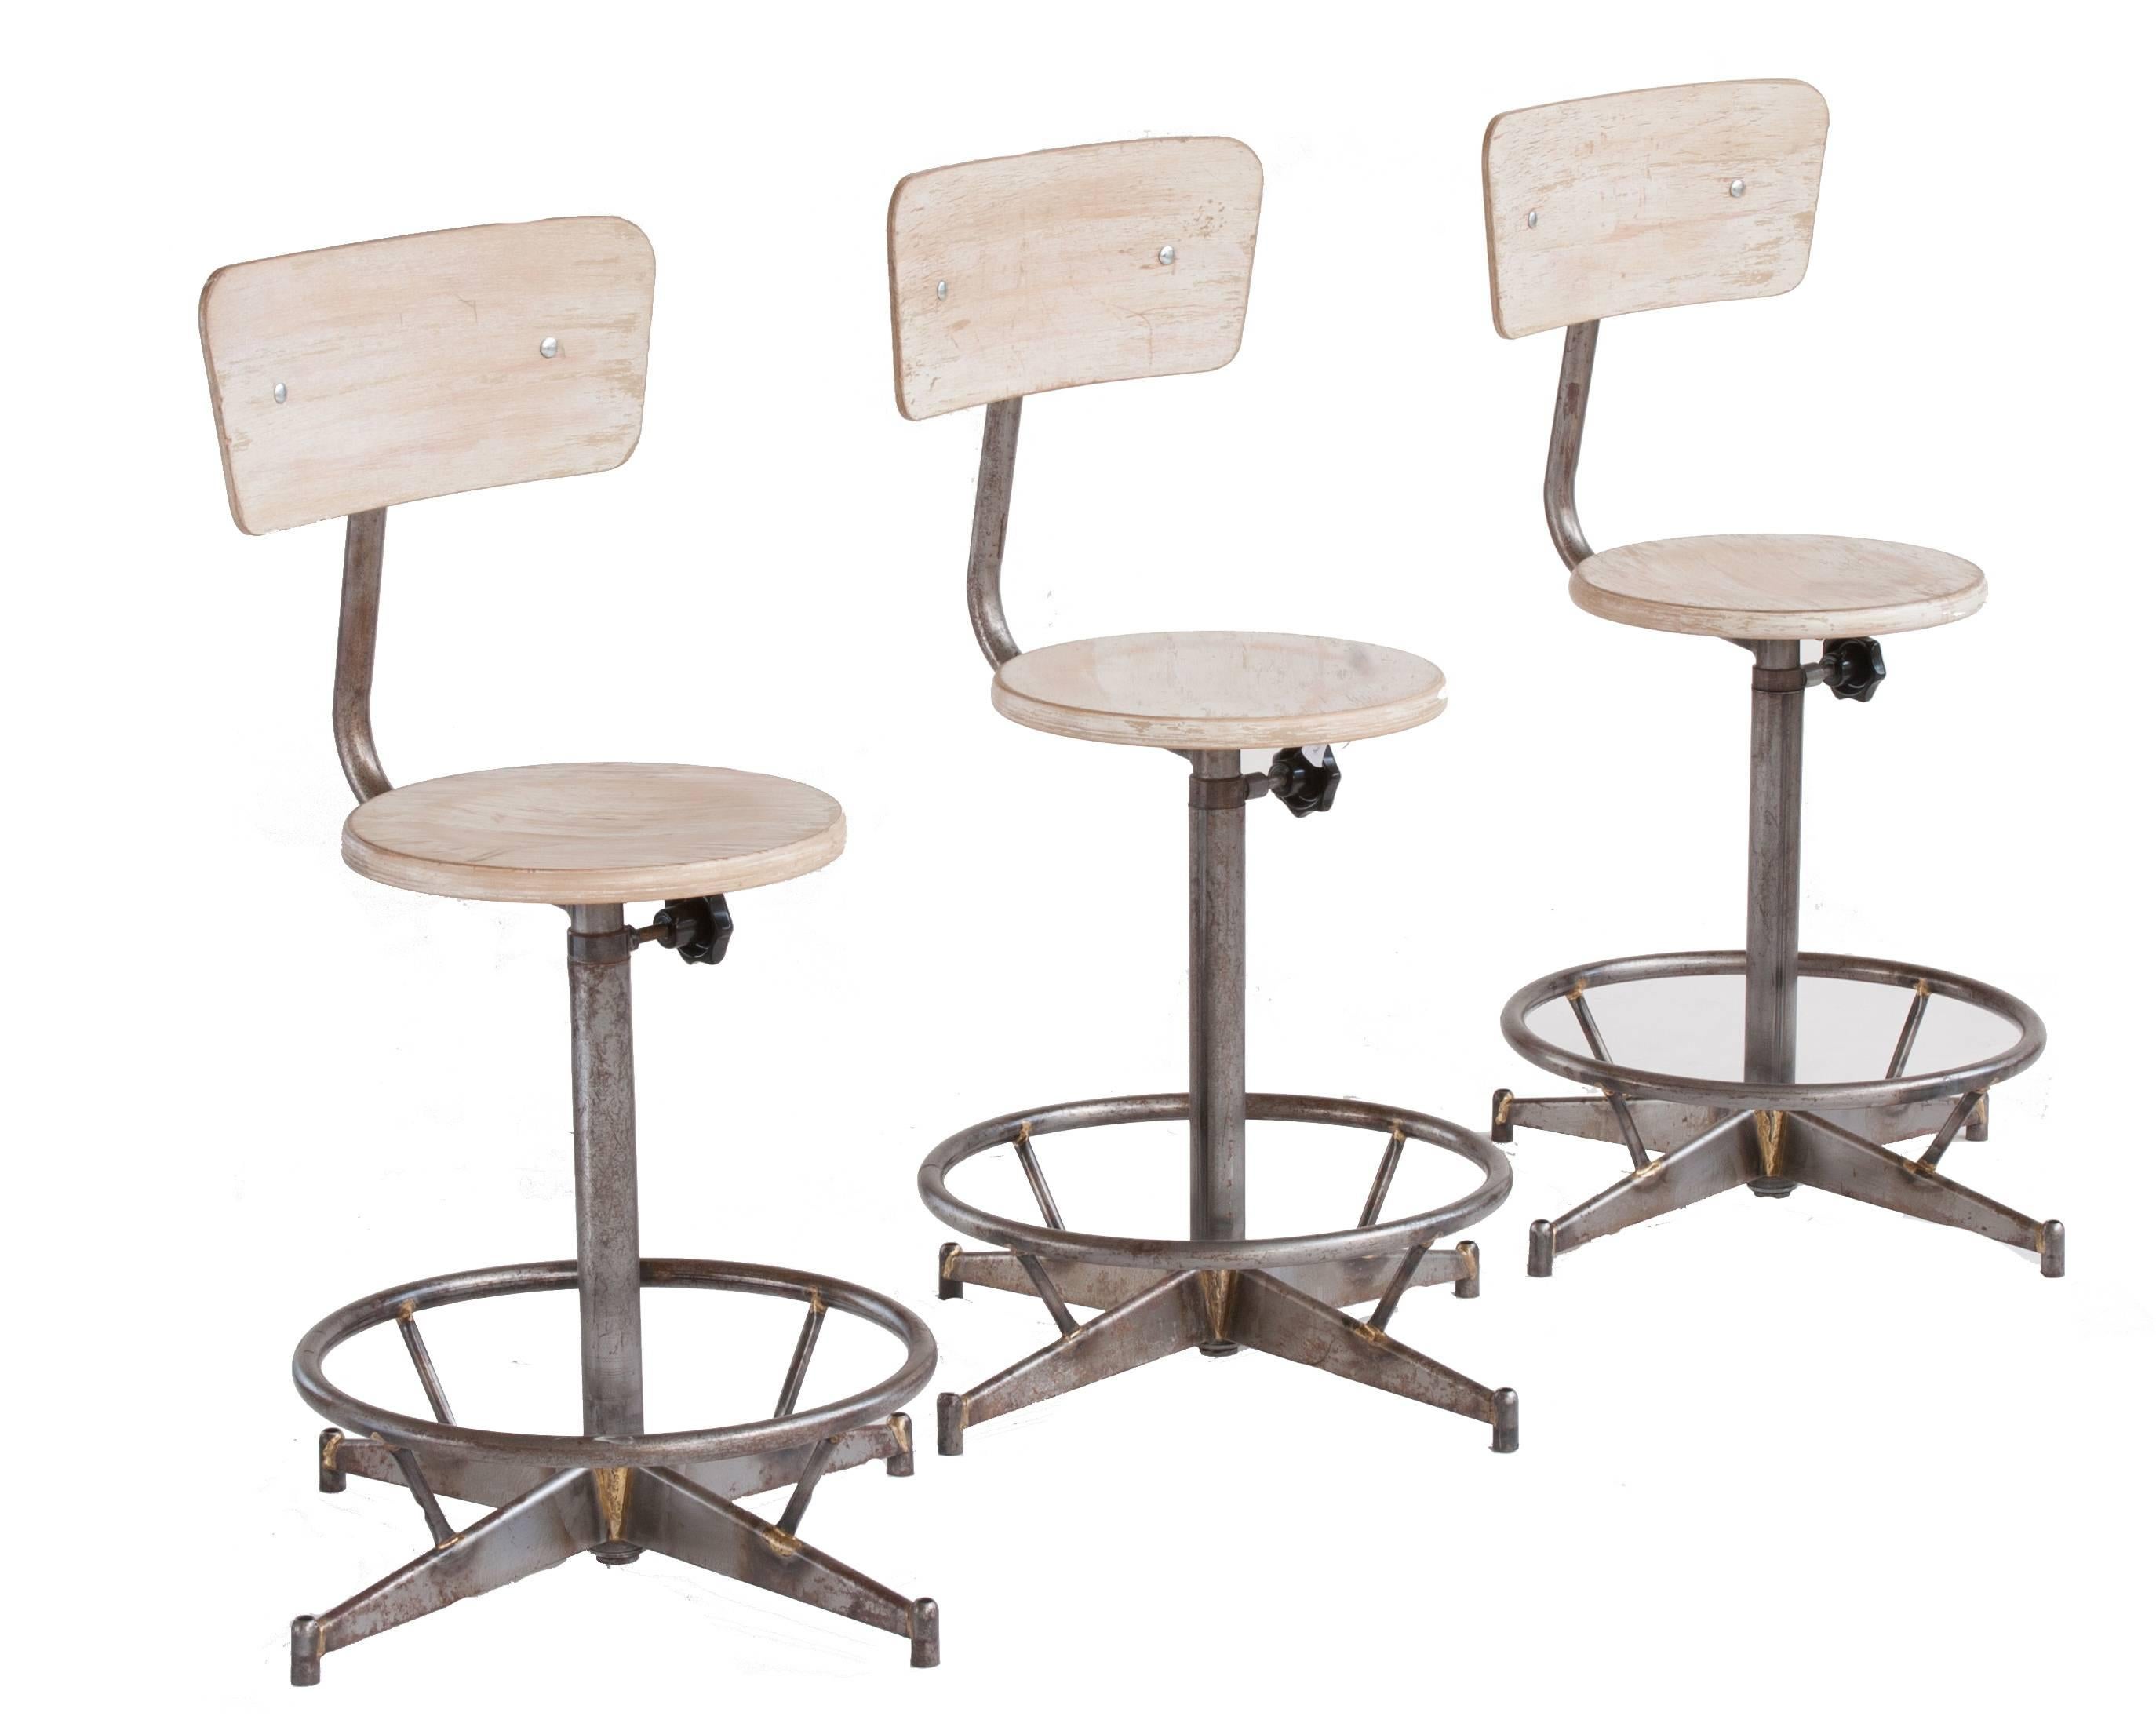 A light wood adjustable Industrial swivel stool with back.